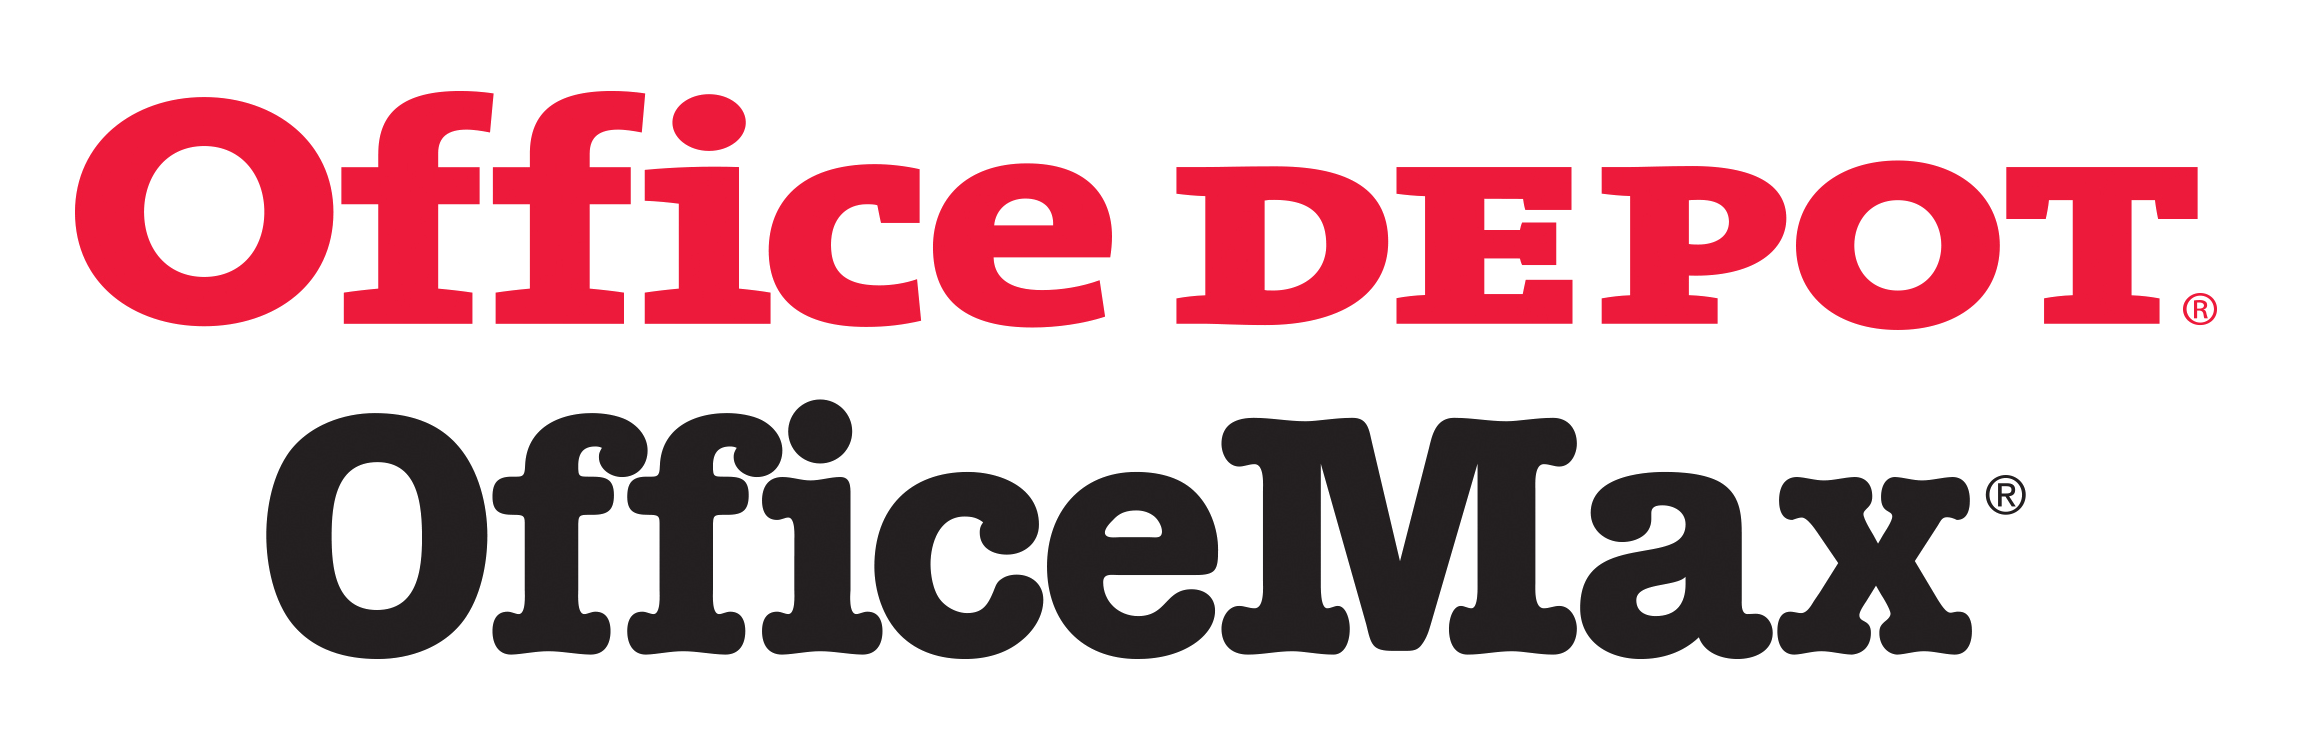 Download Office Depot Logo PNG Image for Free